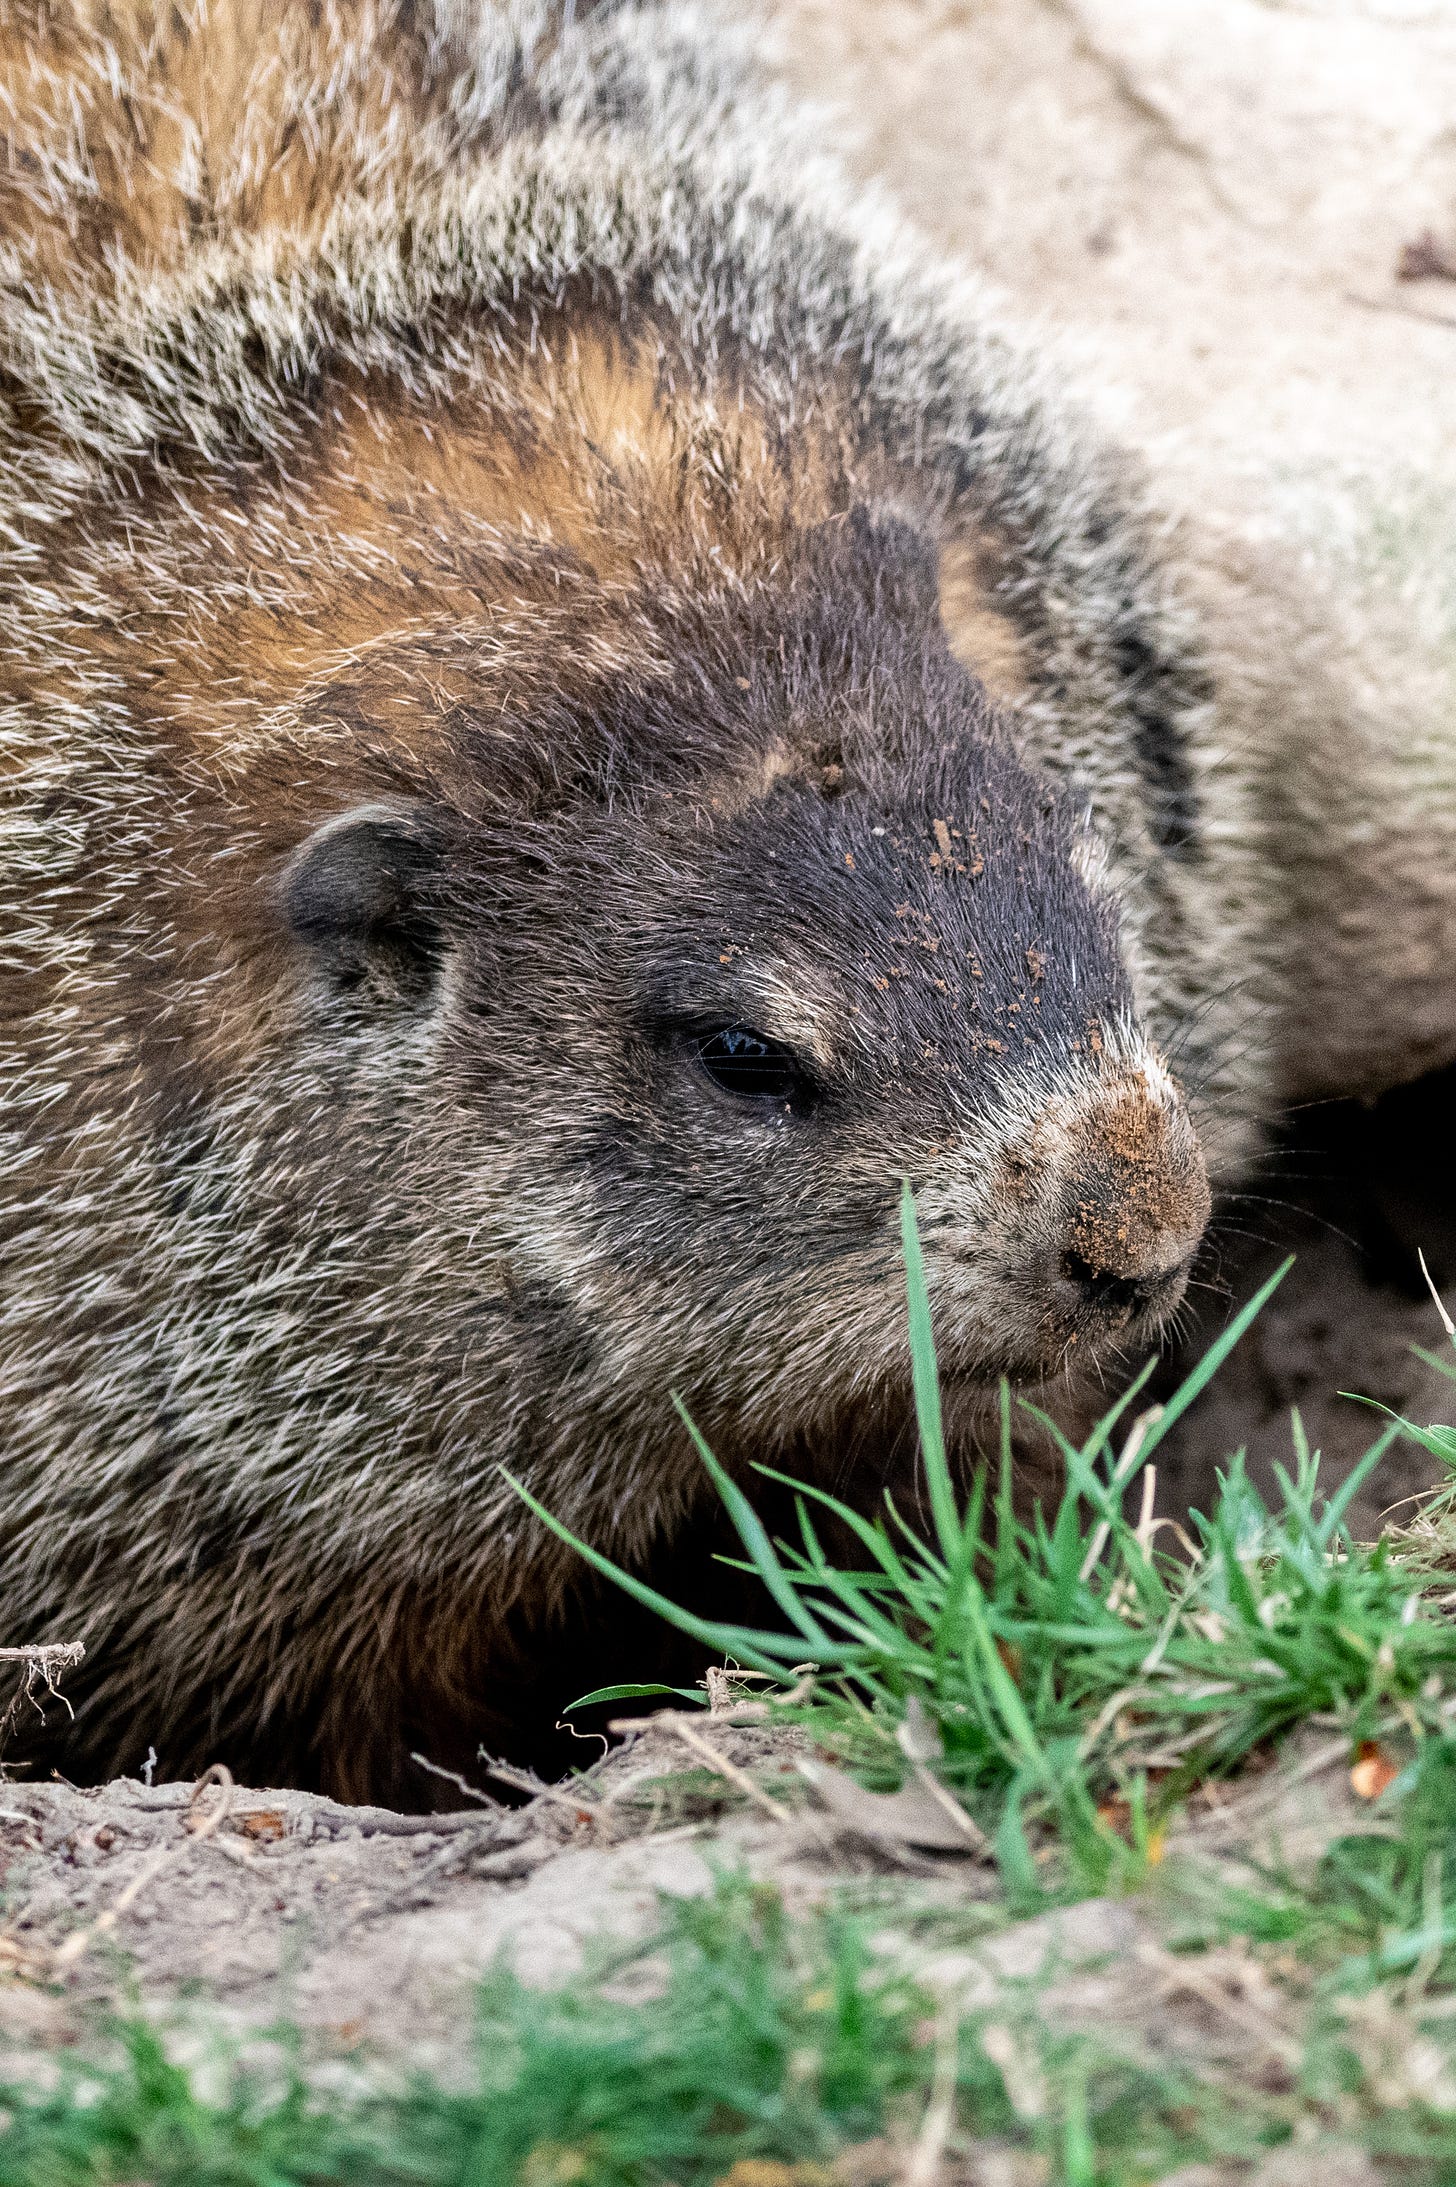 A grumpy-looking, dusty groundhog, emerging from a hole